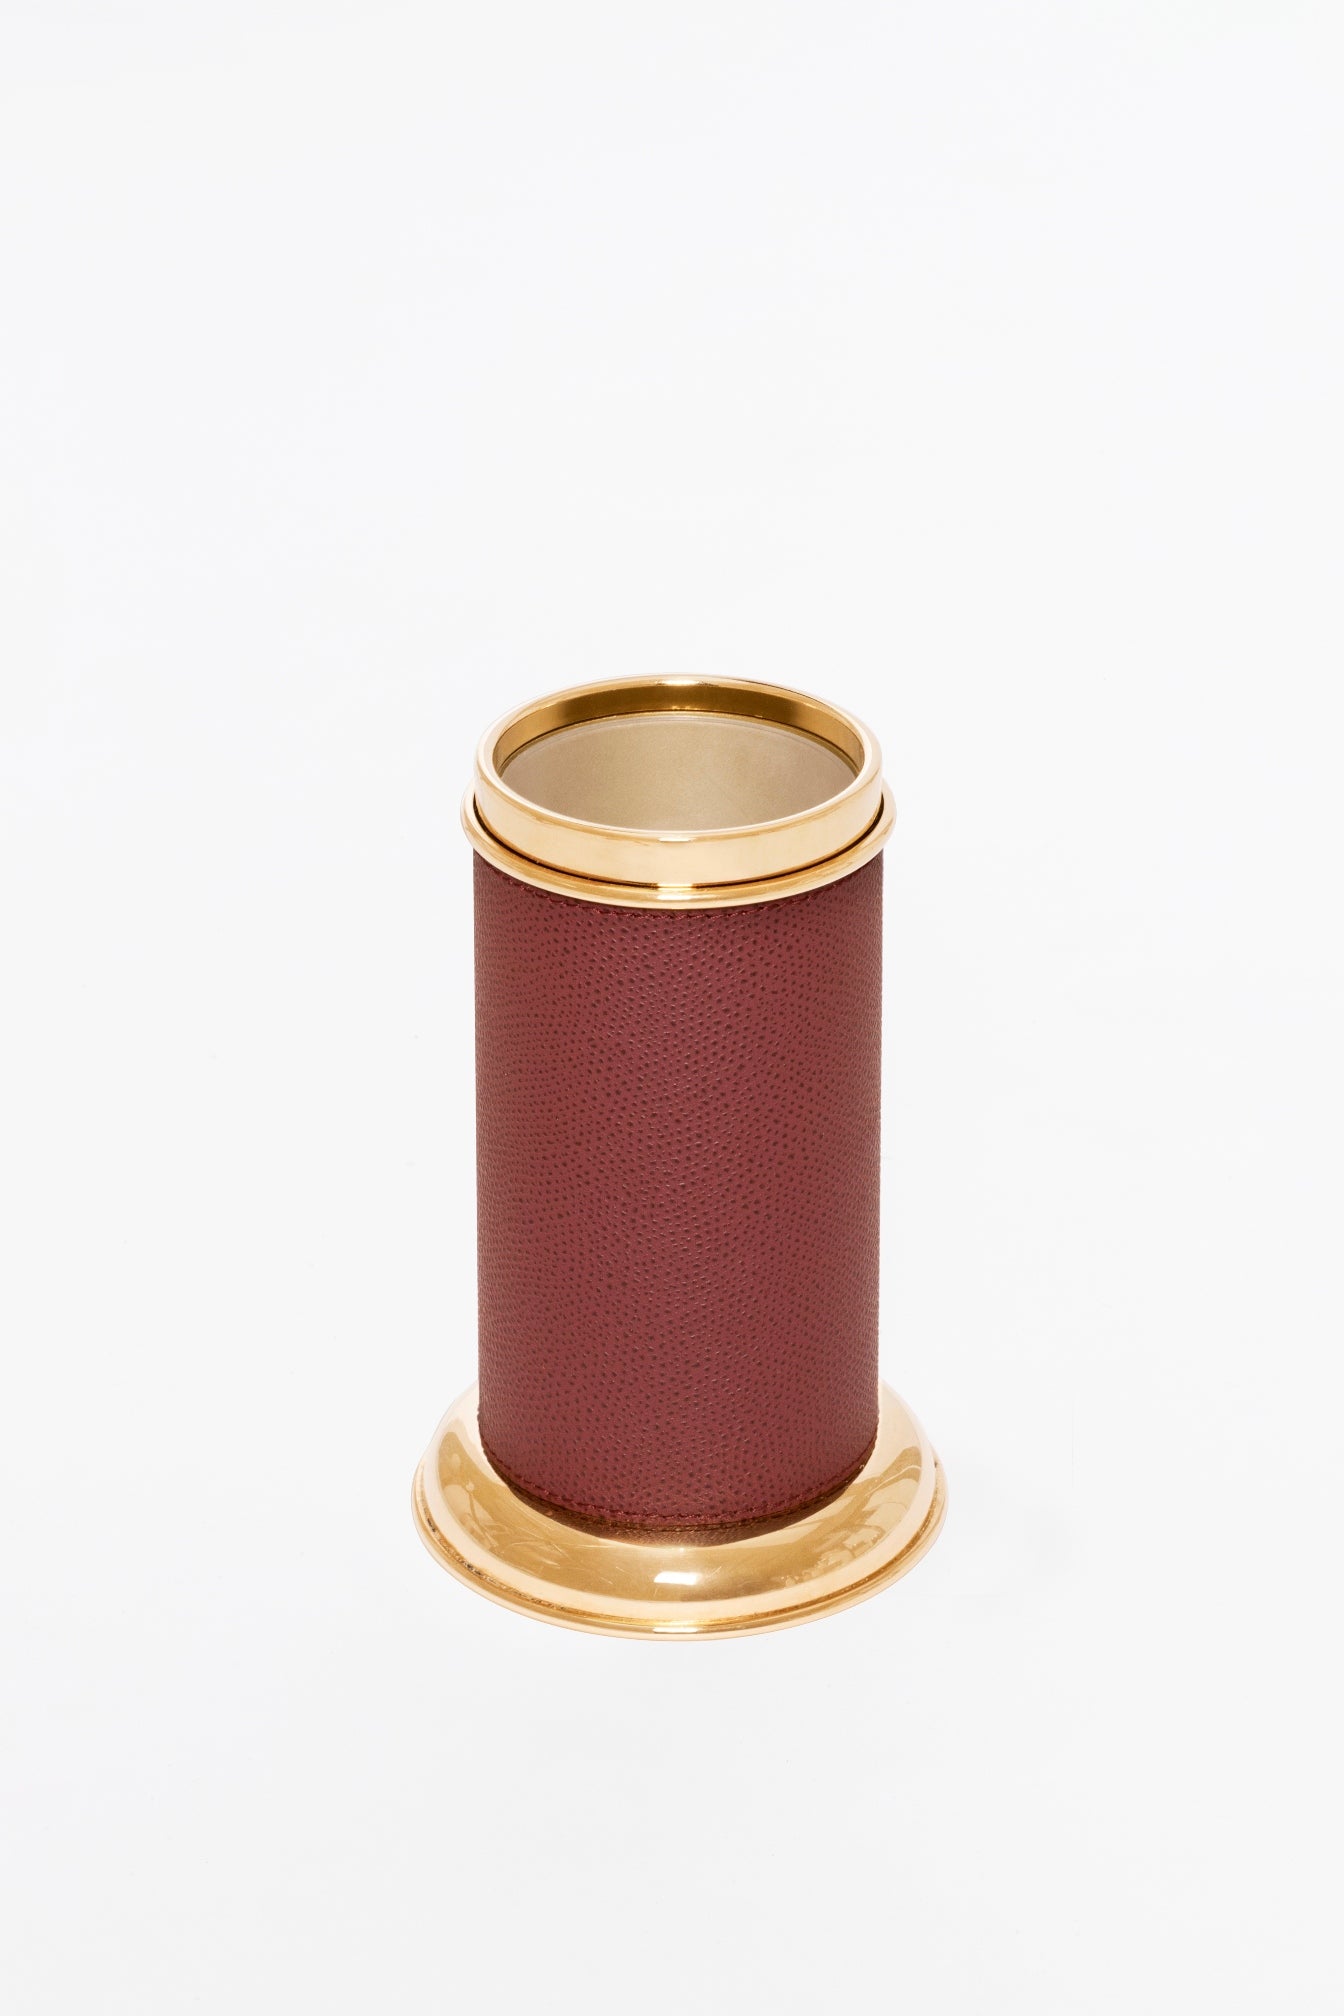 Giobagnara Dubai Leather-Covered Metal Toothbrush Holder | Part of Dubai Bathroom Collection | Luxurious Bath Accessories | Crafted with Fine Leather-Covered Metal Structure | Elegant and Functional Design | Explore the Dubai Bathroom Collection at 2Jour Concierge, #1 luxury high-end gift & lifestyle shop